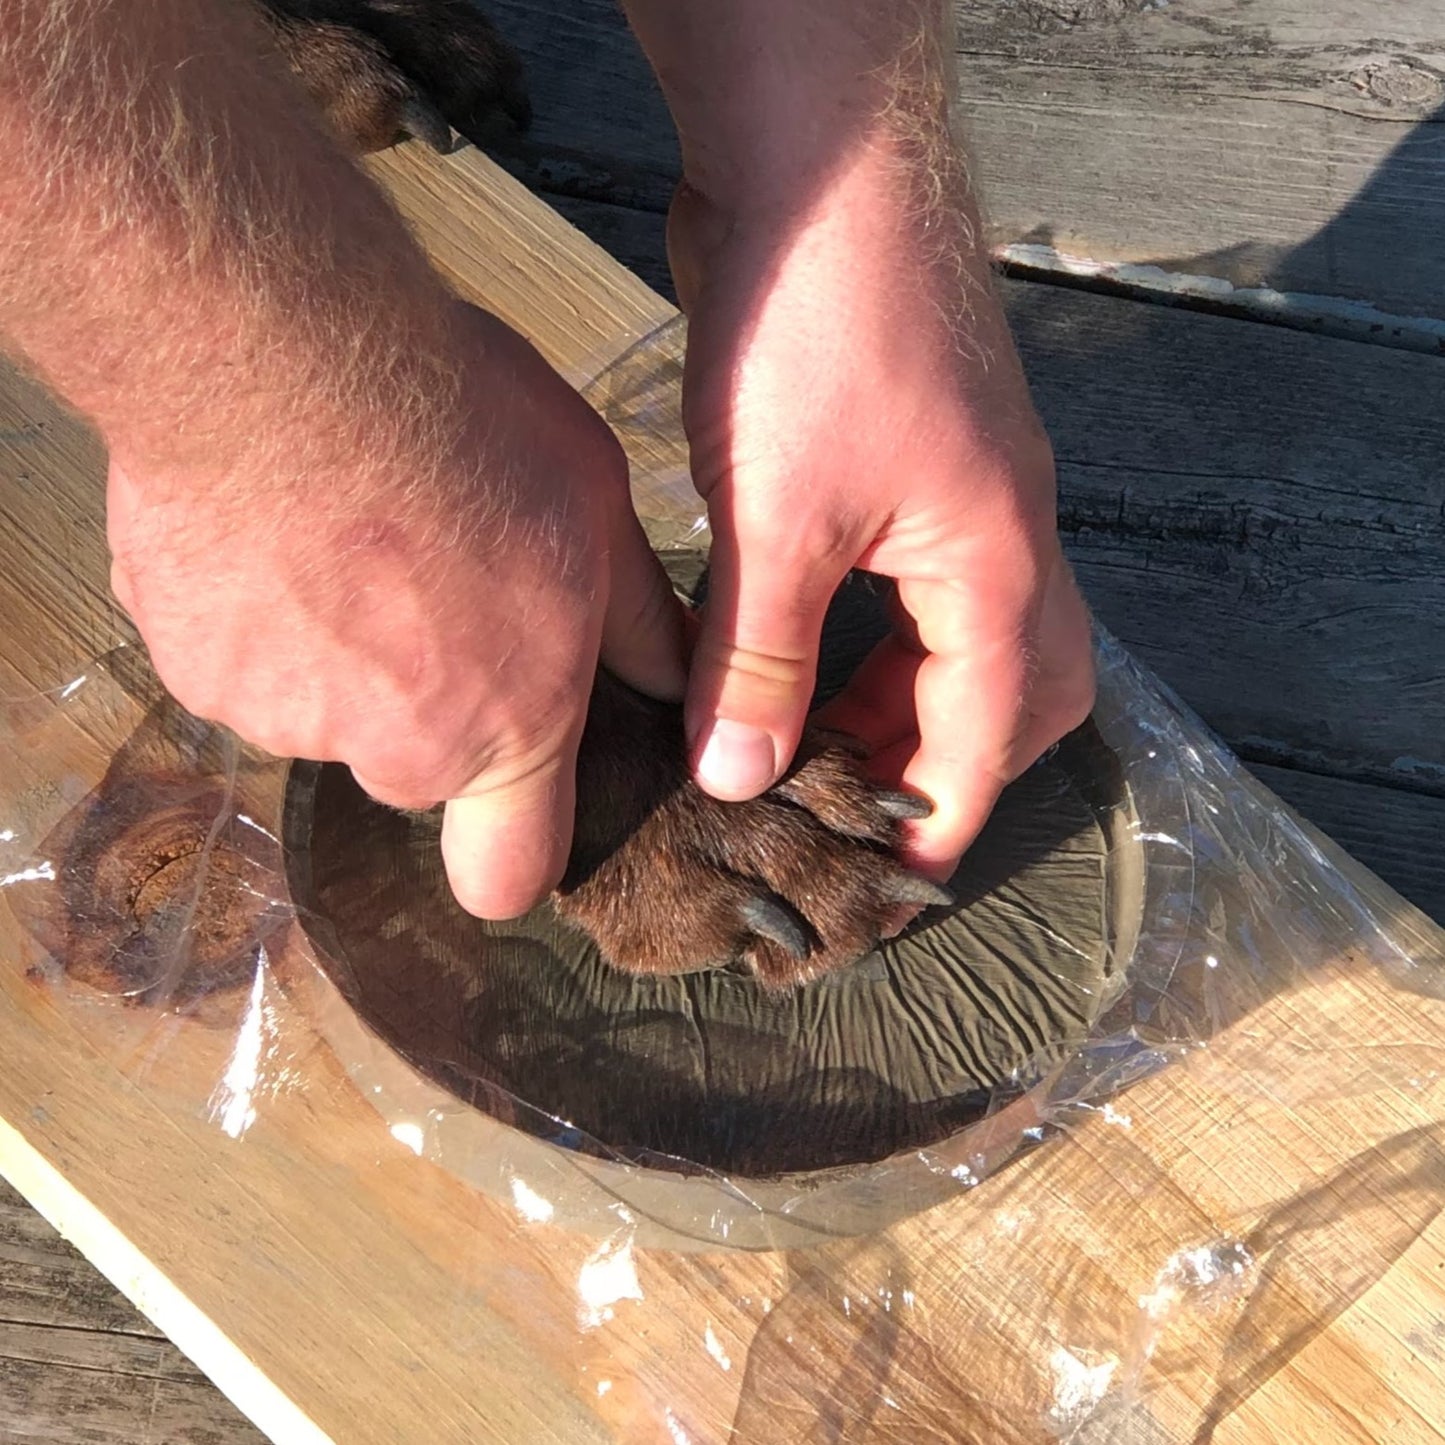 Paw being pressed into wet cement